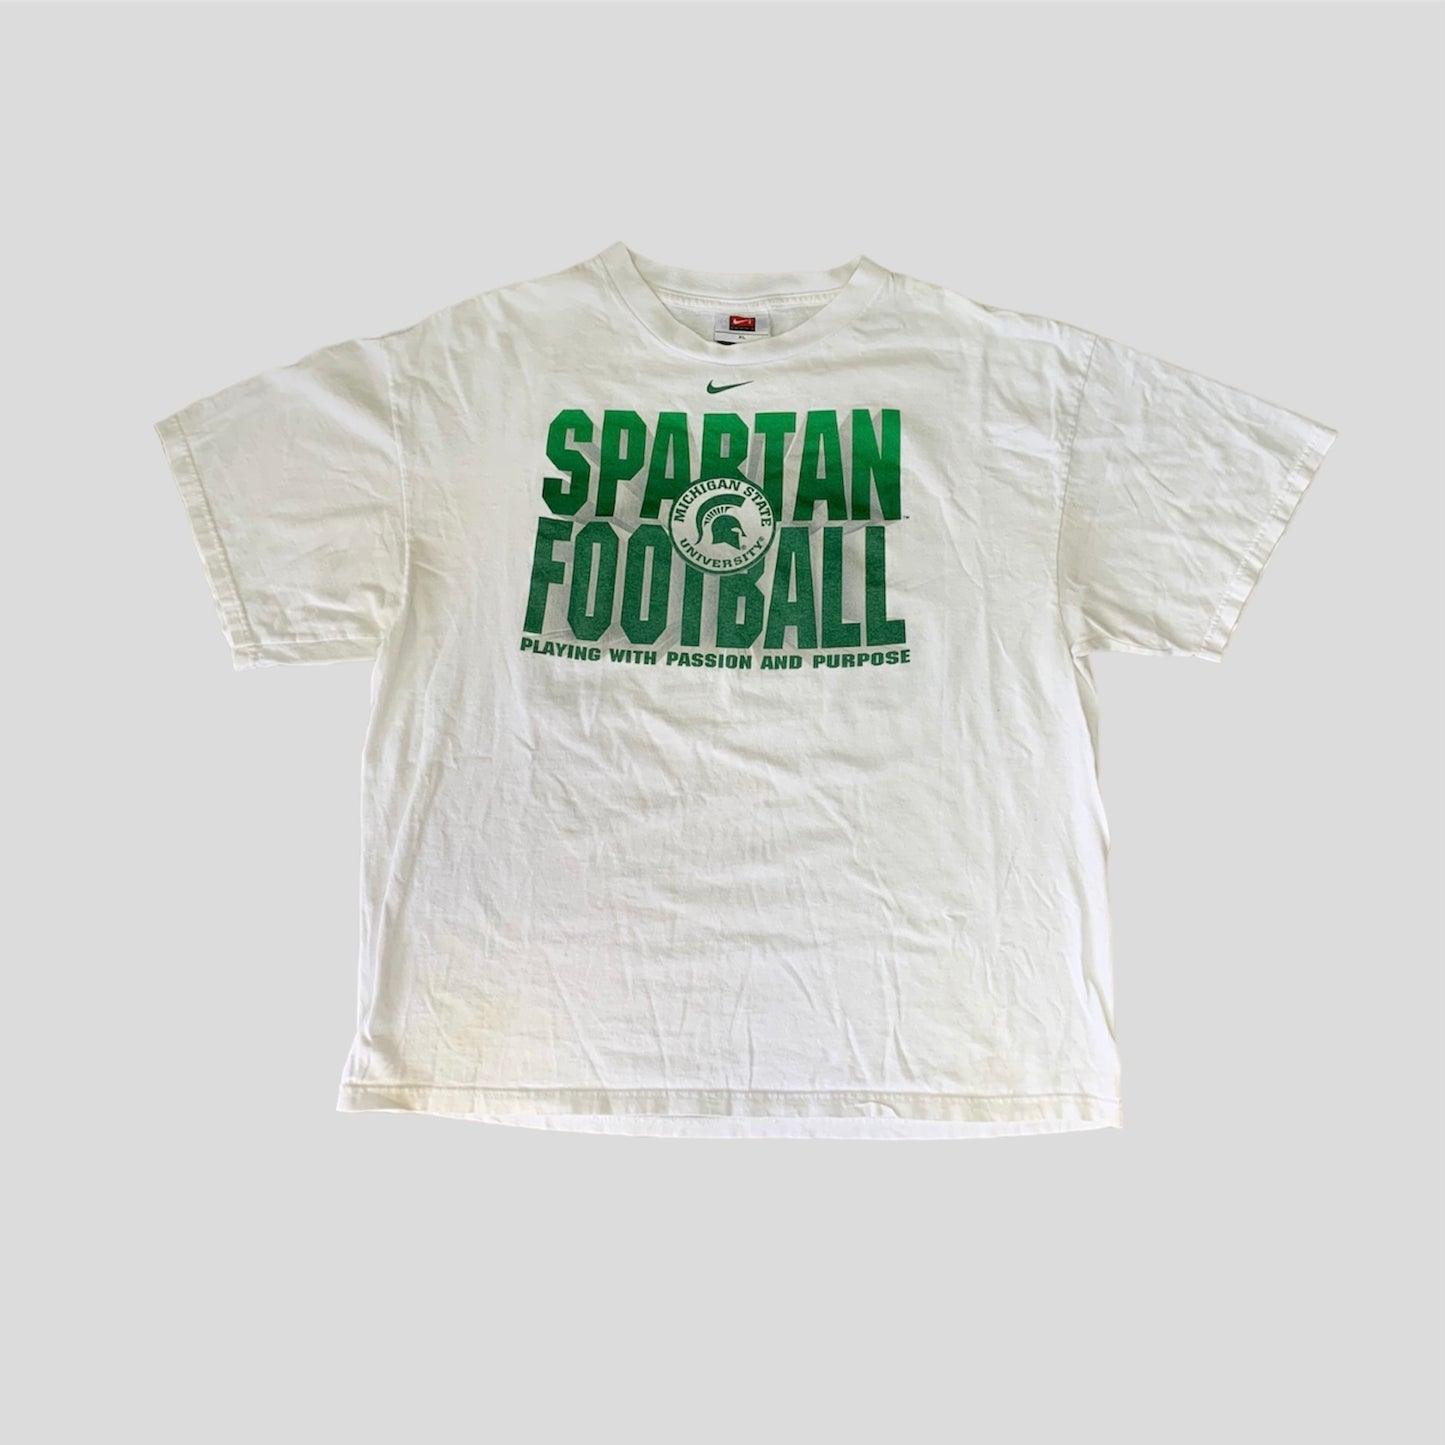 2000s Spartan Football Graphic T